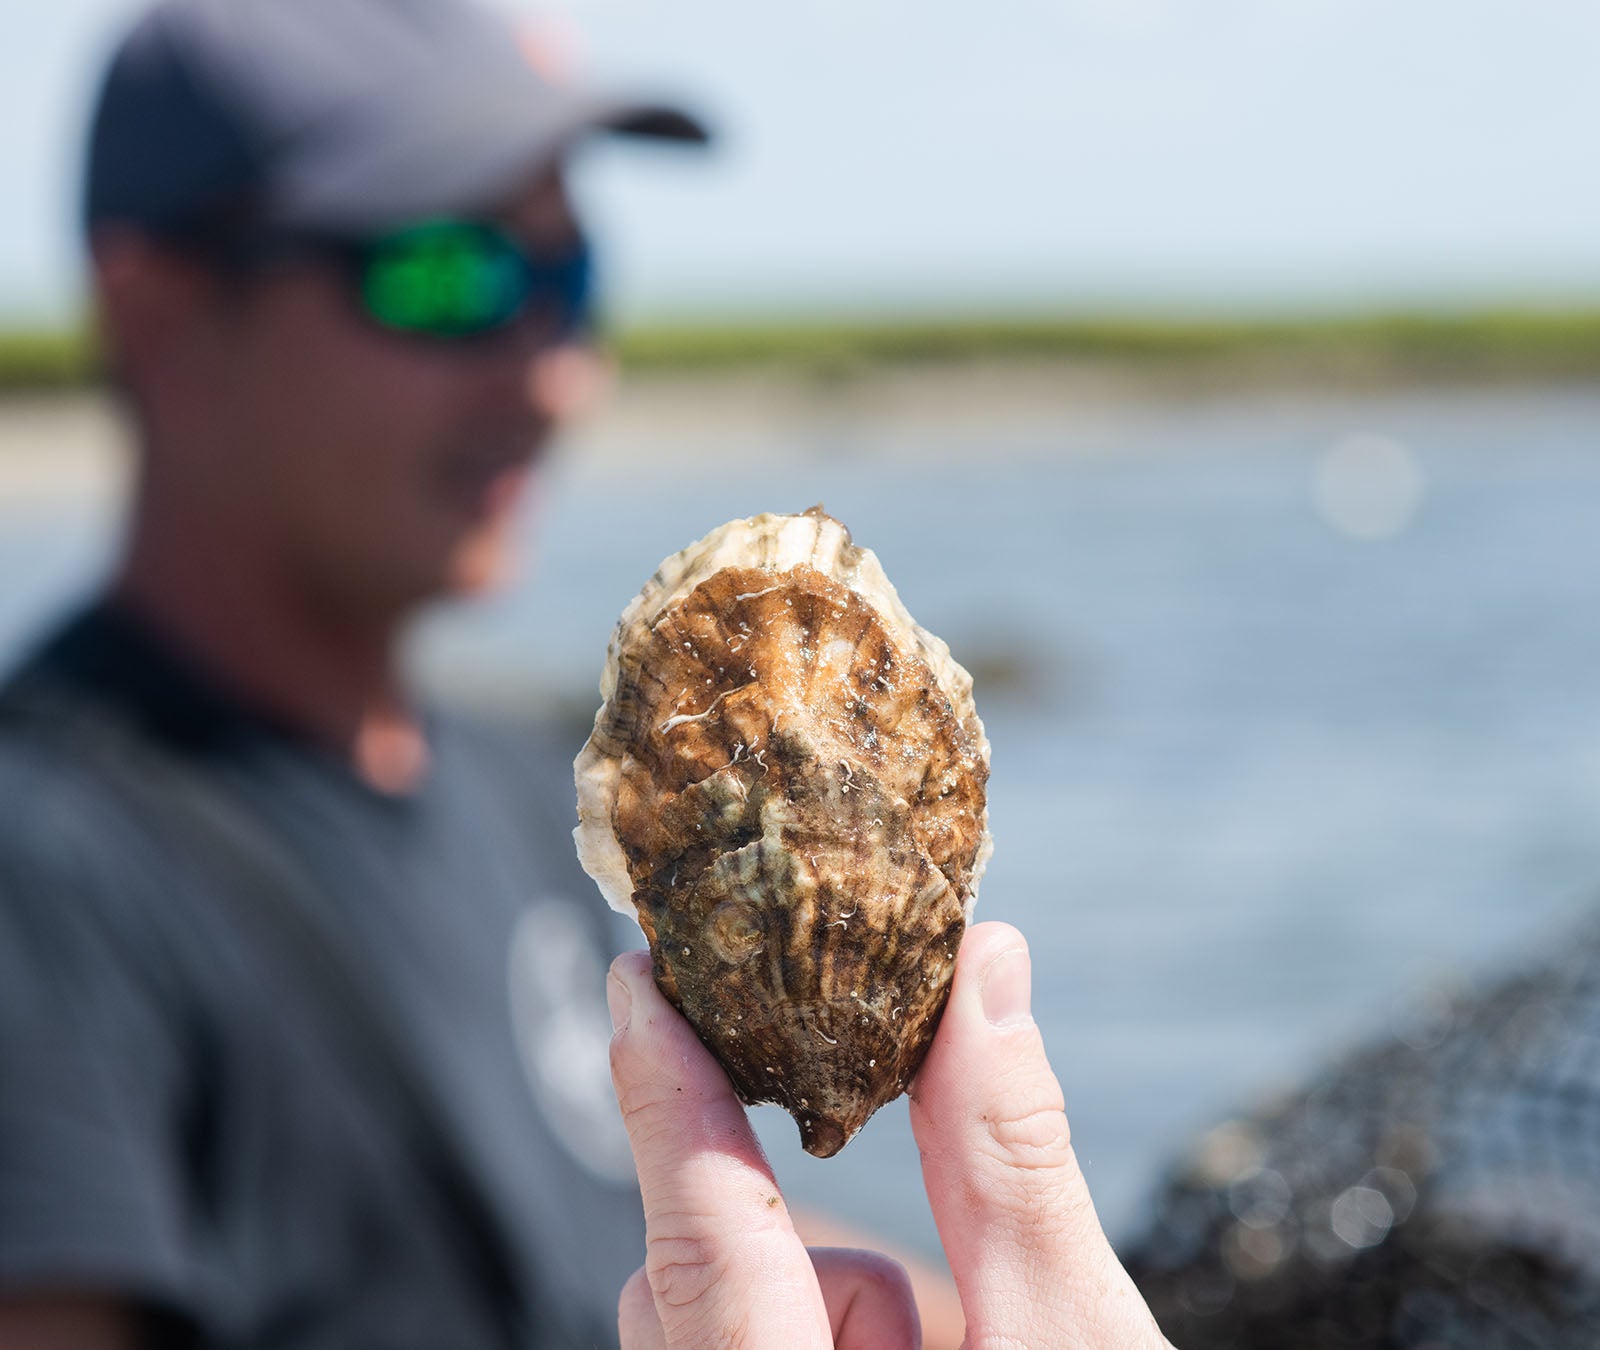 Sconticut Neck Oysters from Fairhaven, MA